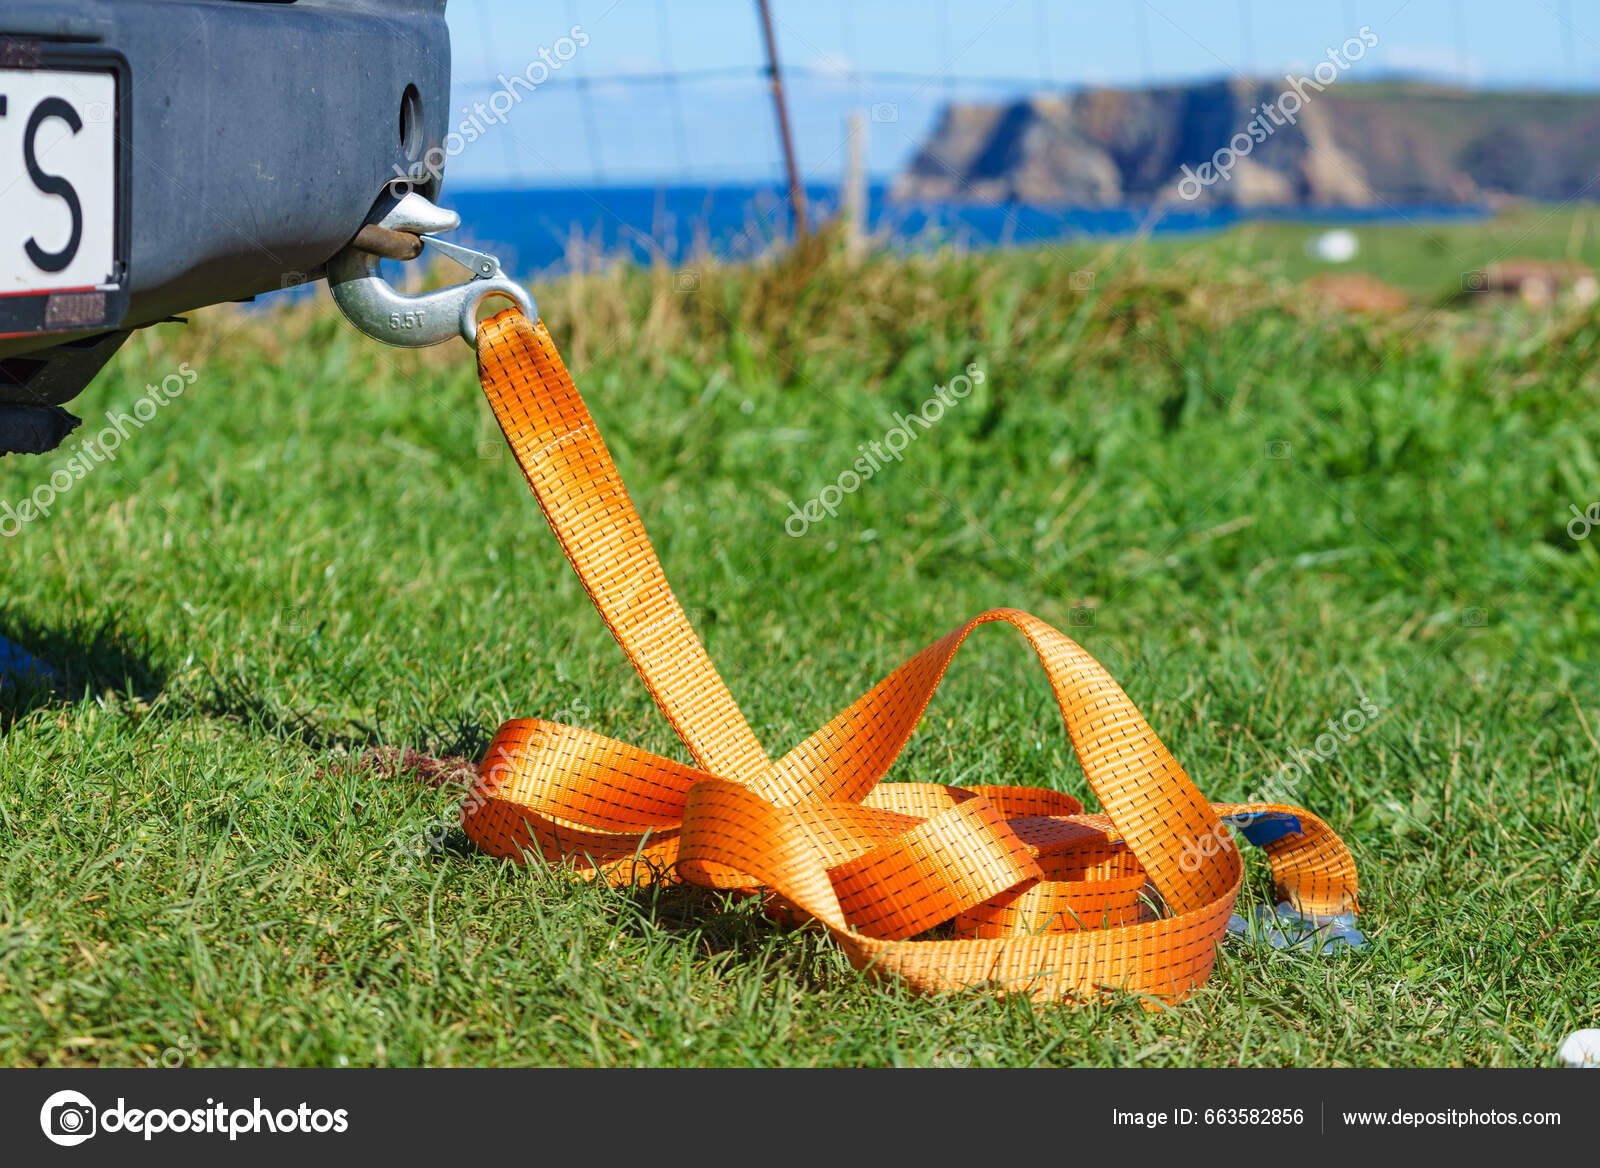 Tow Hook Orange Strap Car Towing Equipment Tugging Stock Photo by